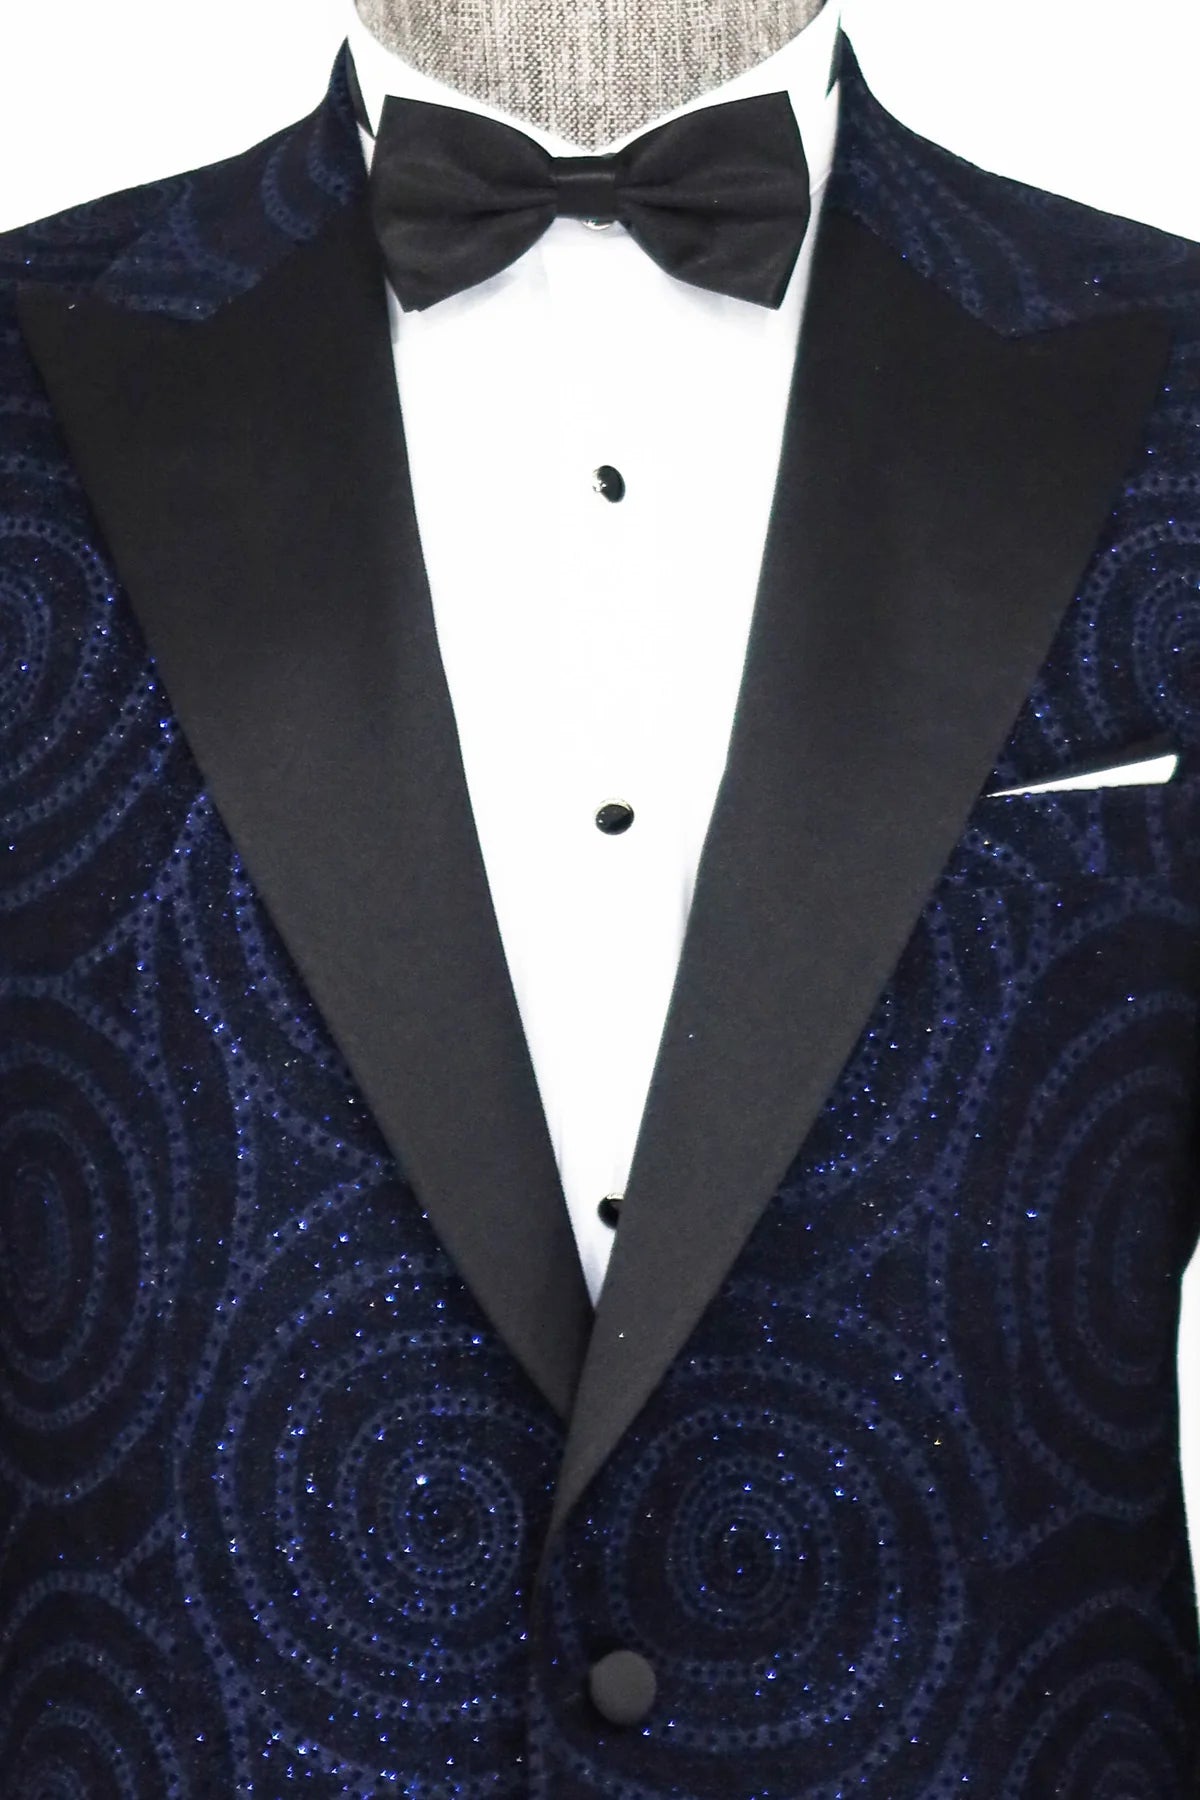 Hypnose Pattern Peak Lapel Slim Fit Navy Men Prom Blazer, perfect for proms and other formal events, available exclusively at KCT Menswear.